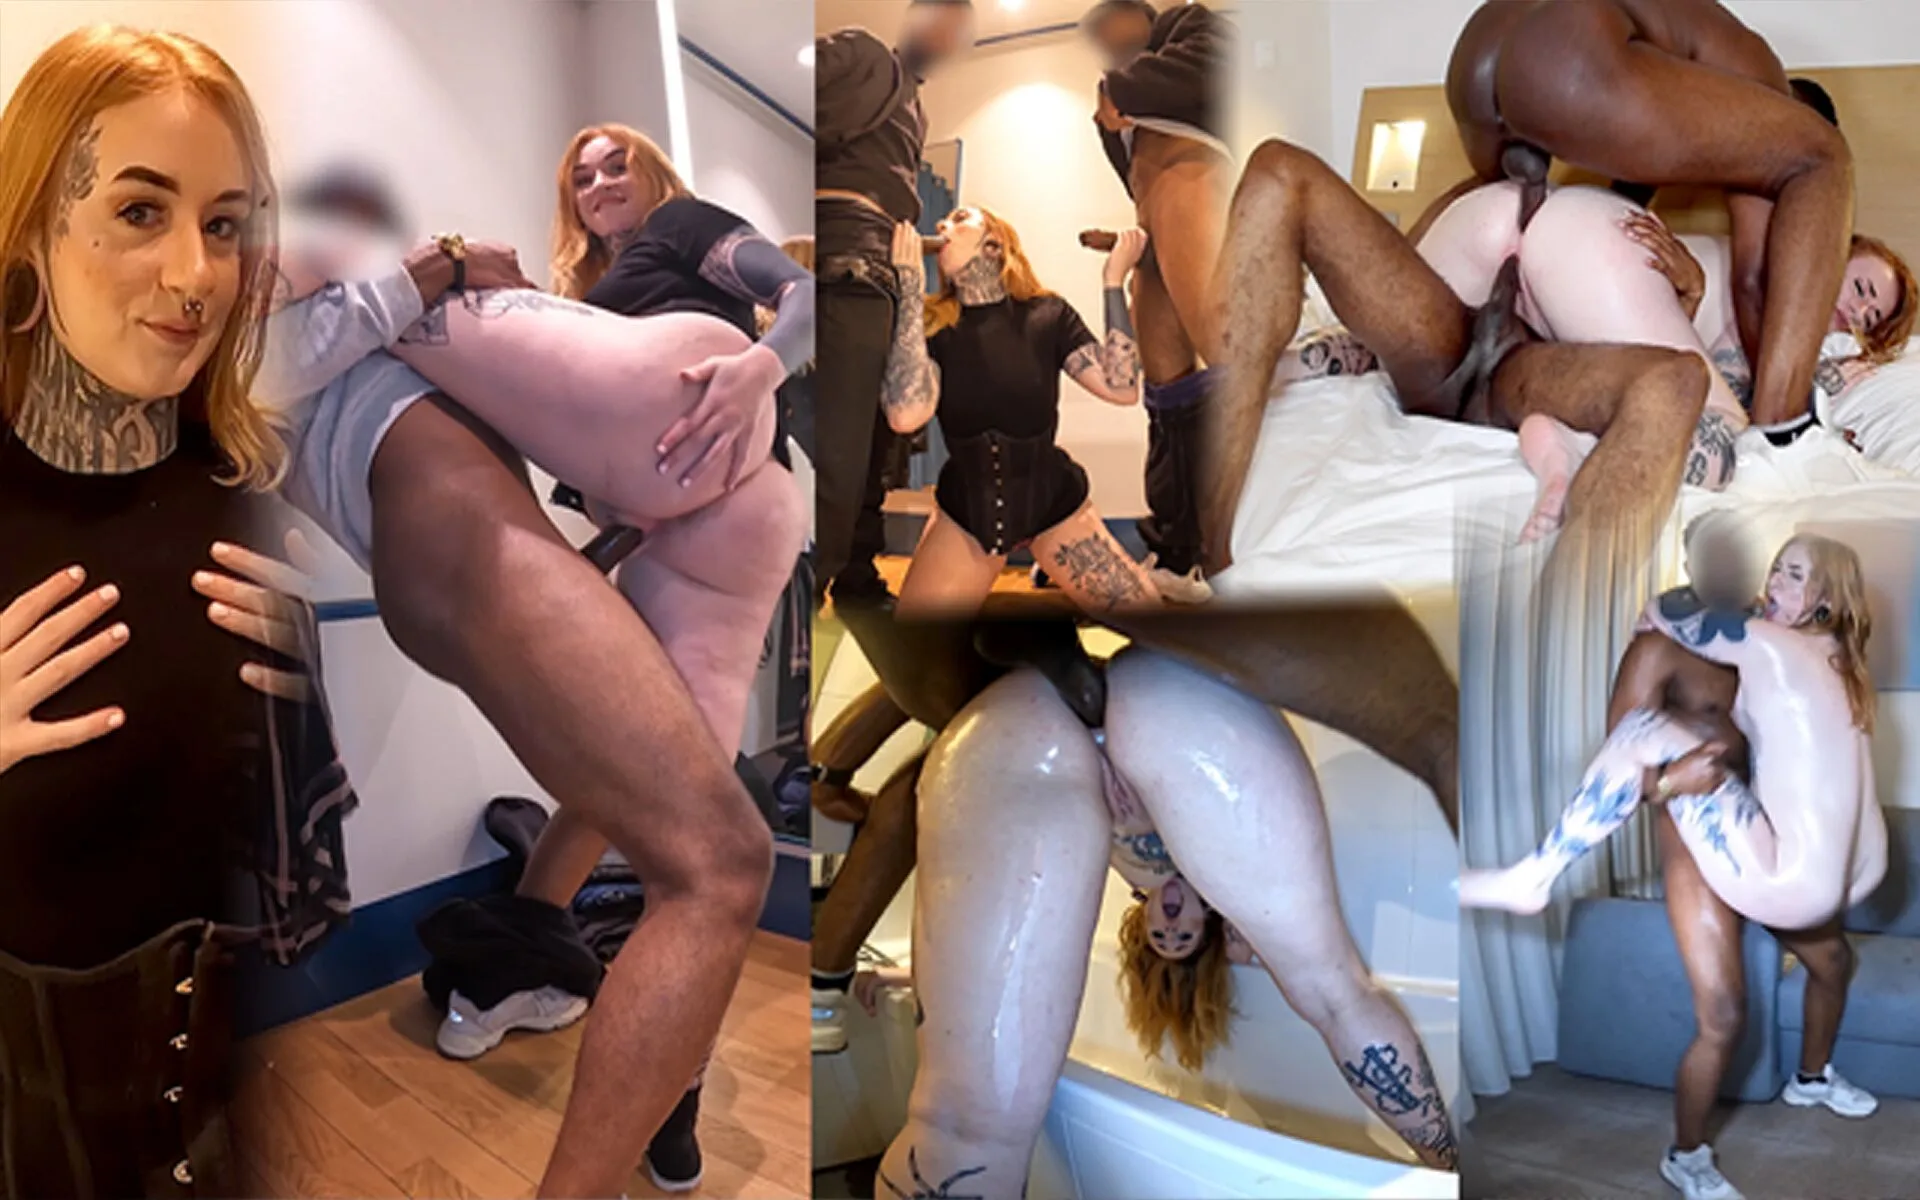 Big Ass British Student Gets Anal Fucked Hard in Fitting Room and Hotel Corridor by 2 Strangers!!! by Reels plans Faphouse pic image